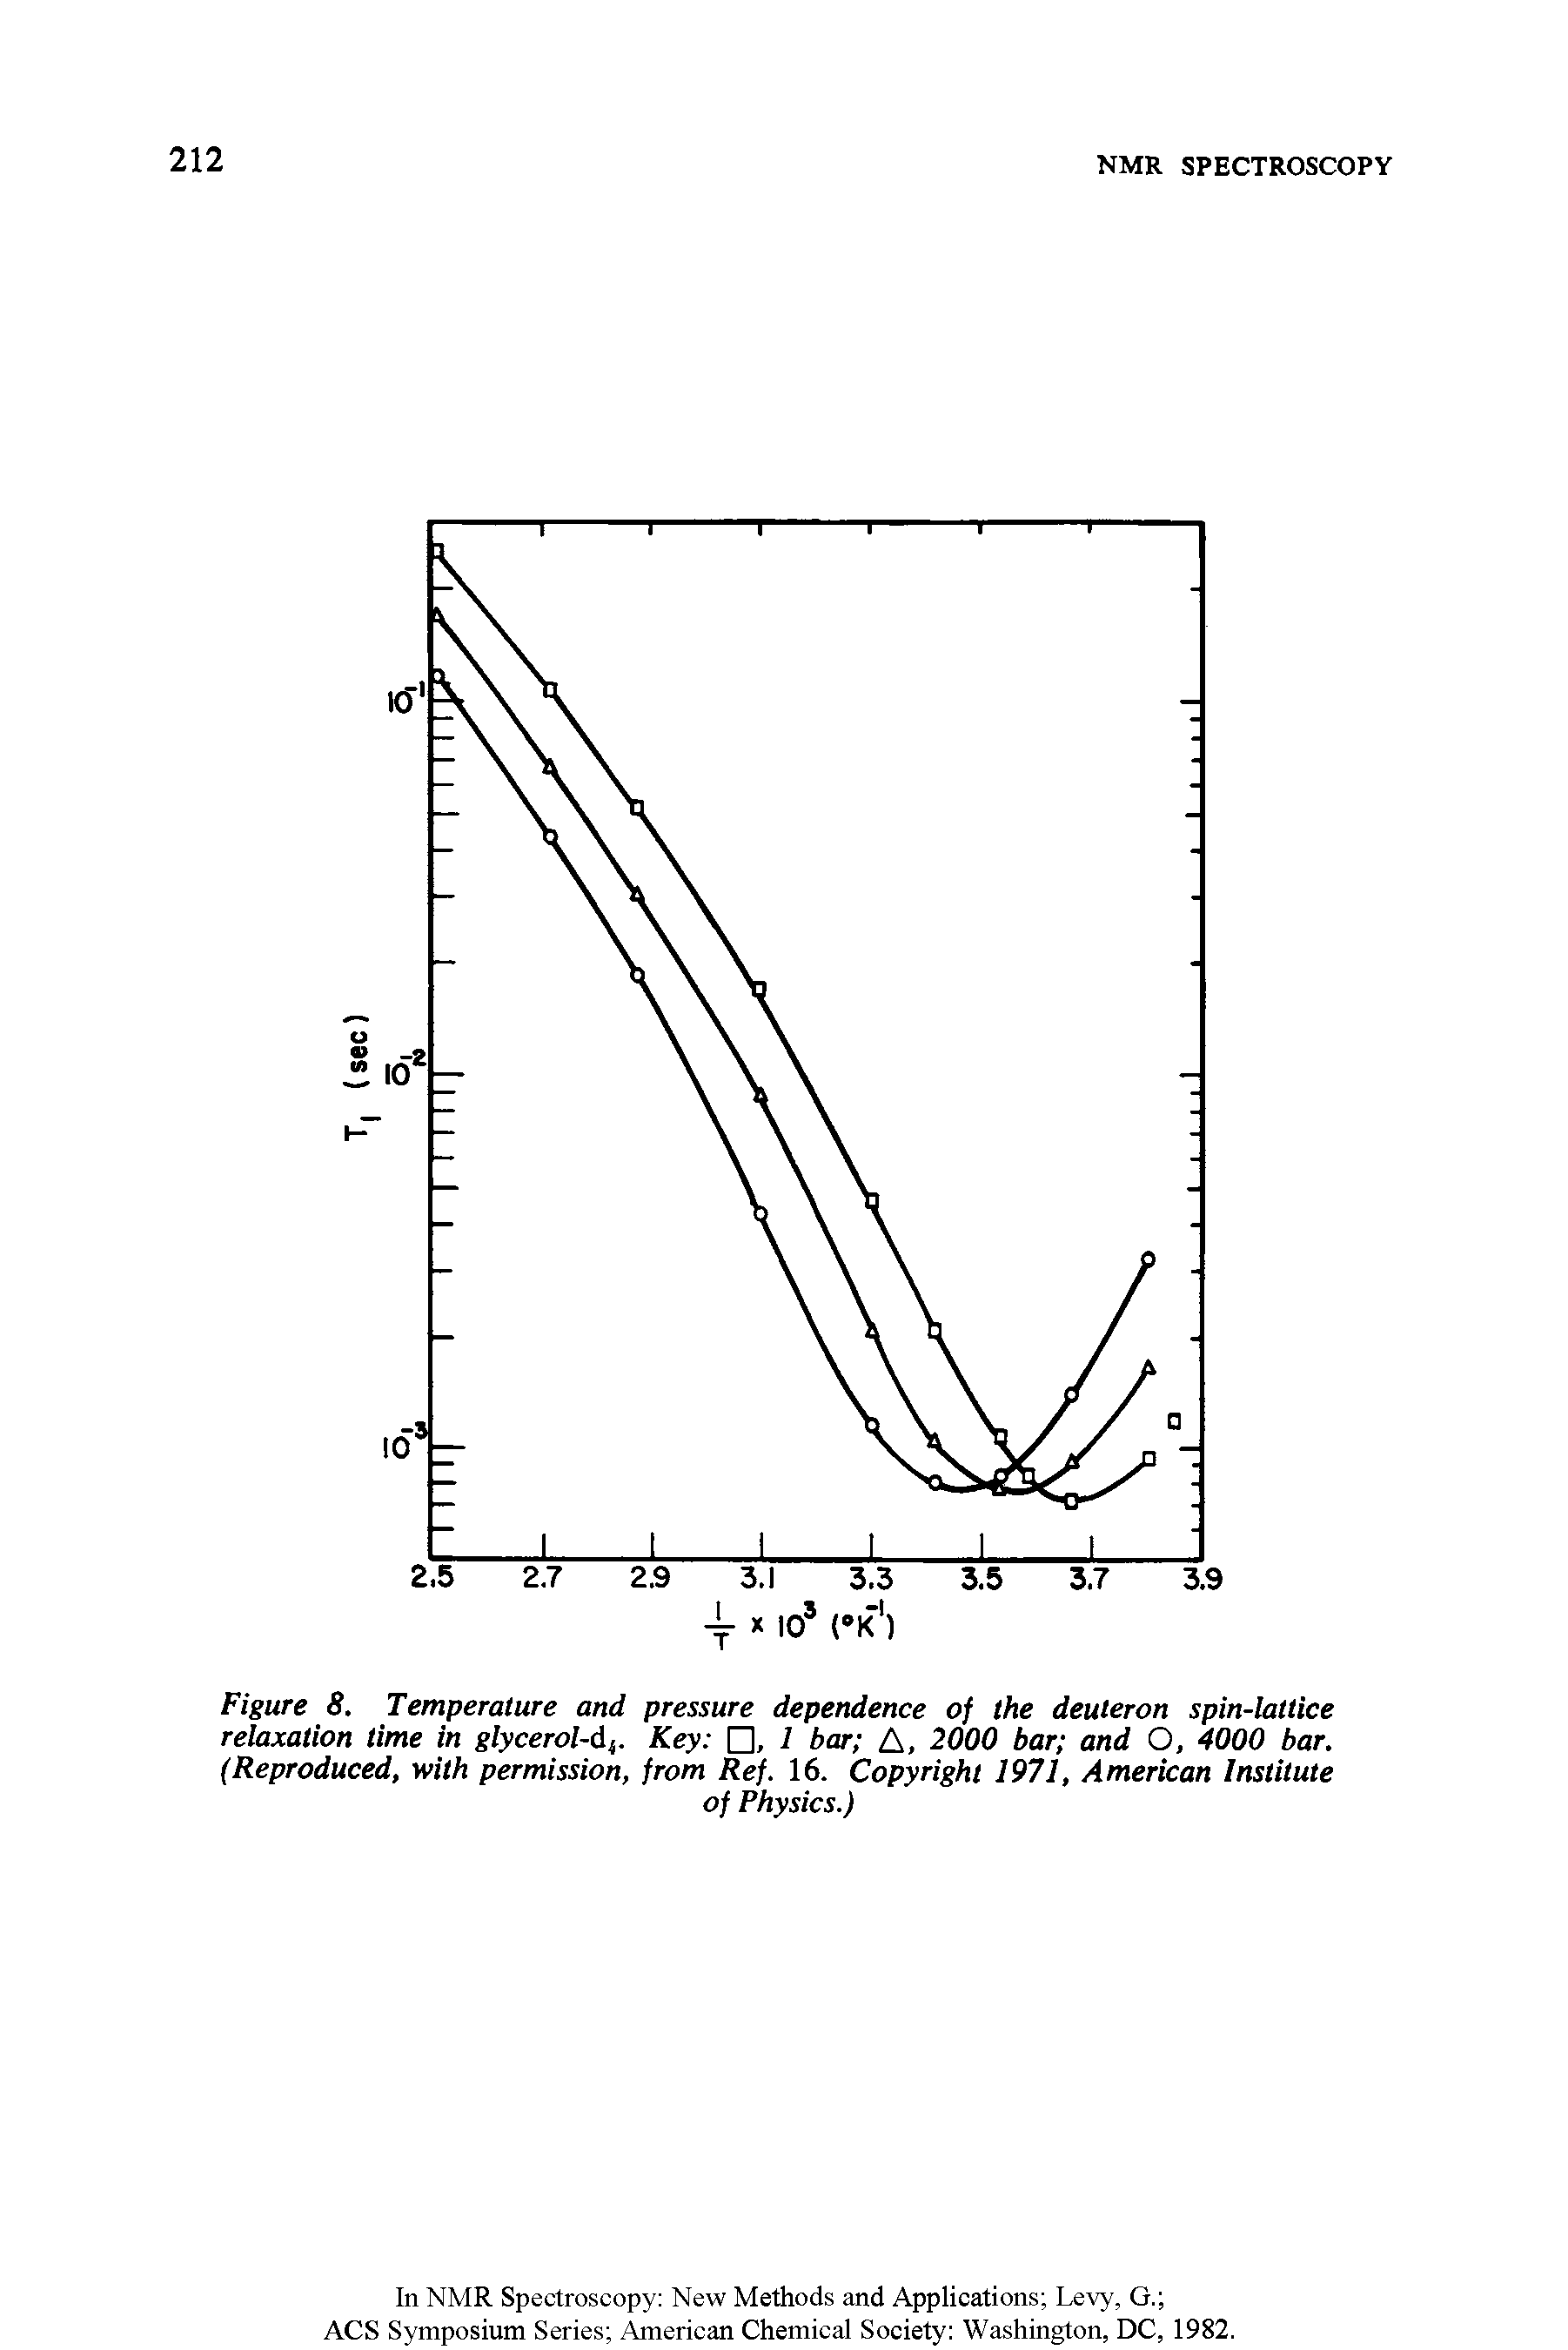 Figure 8. Temperature and pressure dependence of the deuteron spin-lattice relaxation time in glycerol-df. Key , 1 bar A, 2000 bar and O, 4000 bar. (Reproduced, with permission, from Ref. 16. Copyright 1971, American Institute...